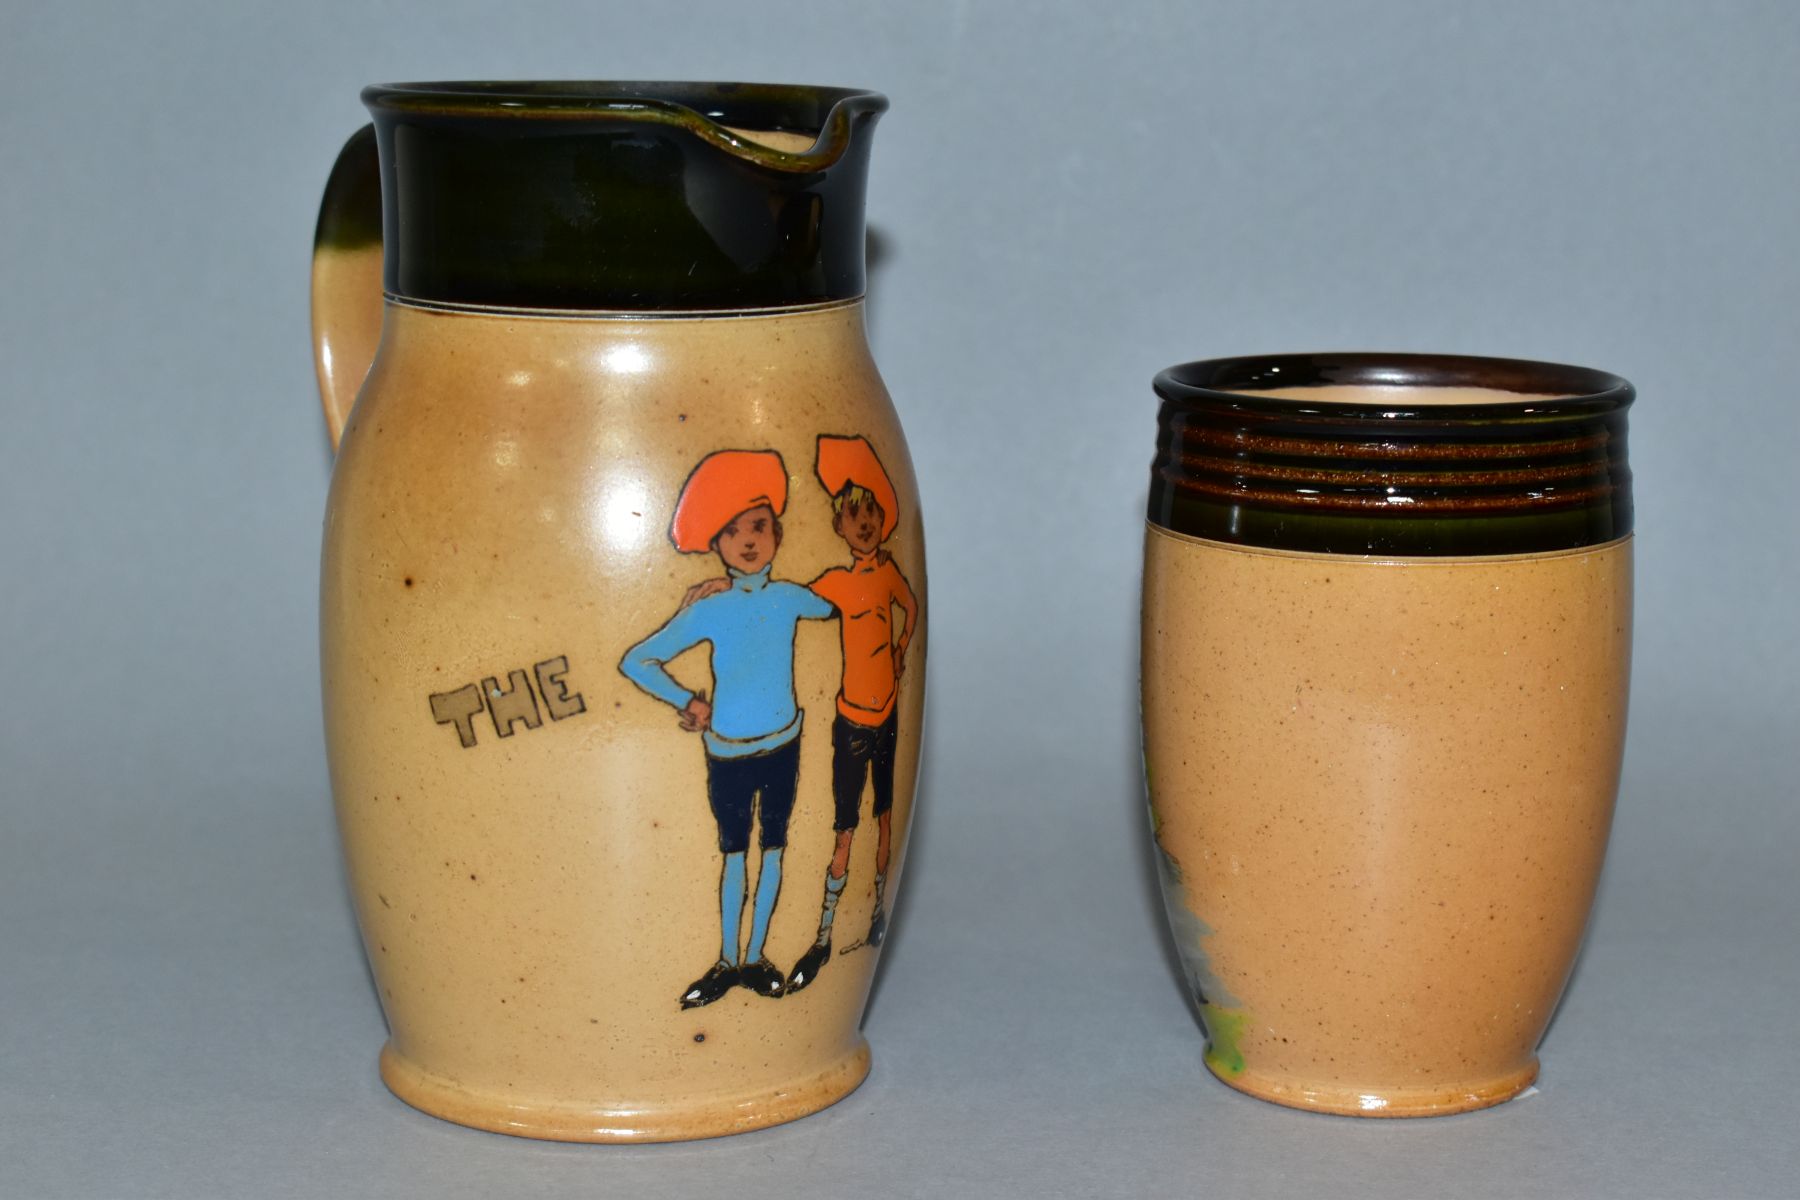 TWO EARLY 20TH CENTURY ROYAL DOULTON LAMBERTH STONEWARE ITEMS FROM THE TWINS SERIES WARE by John - Image 2 of 4